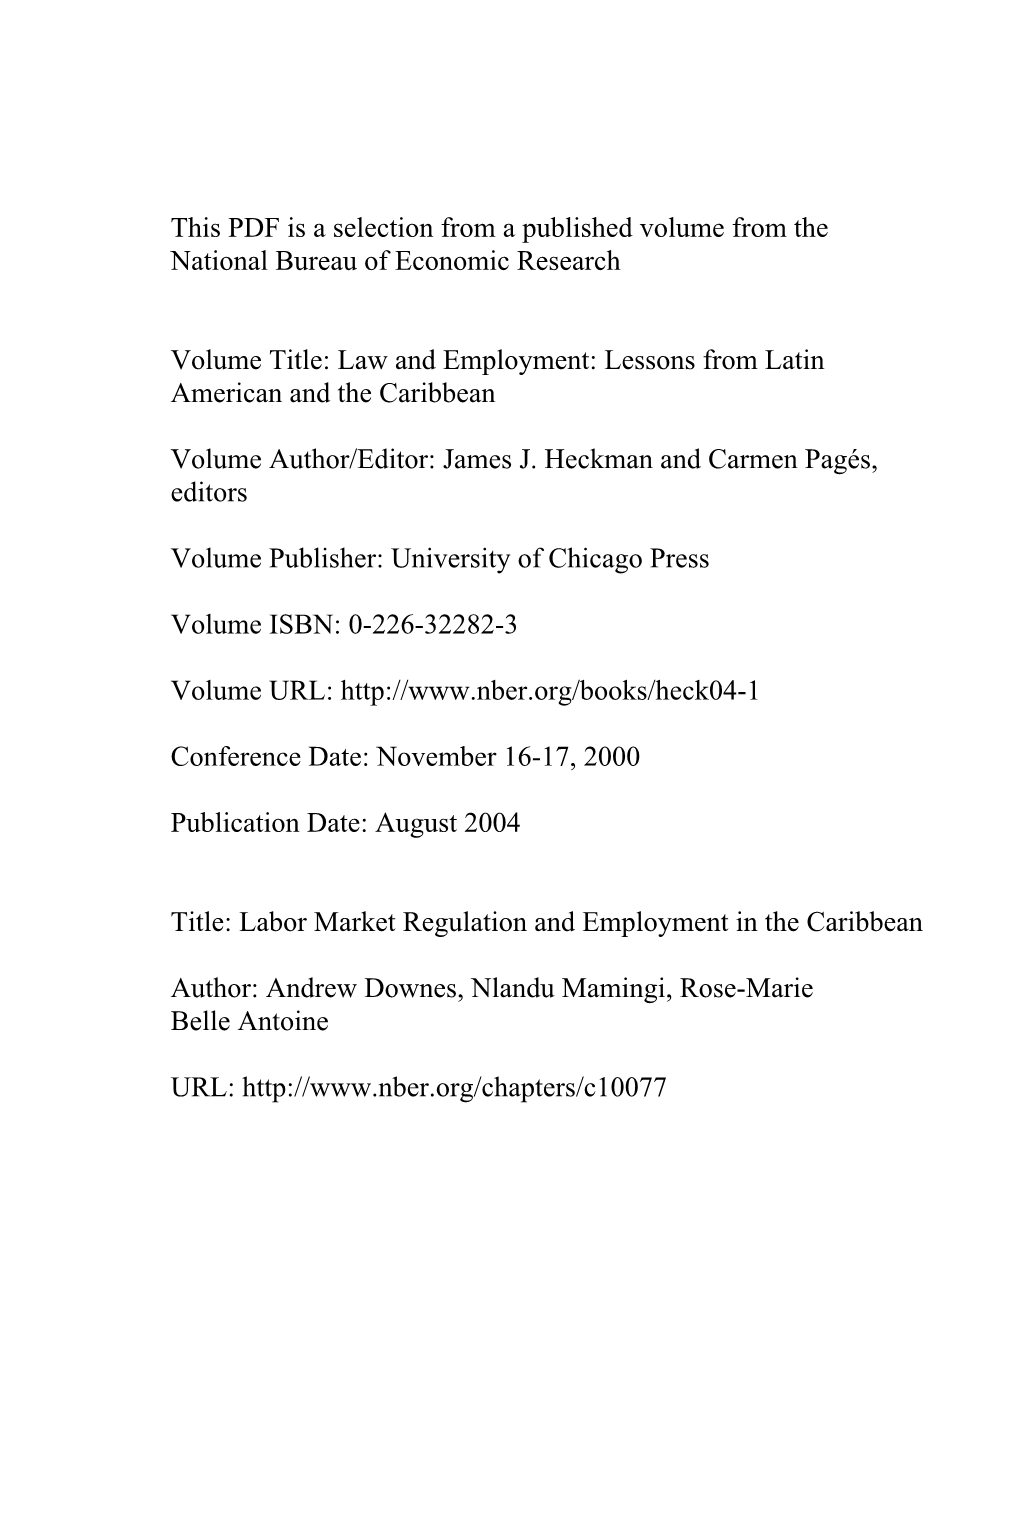 Labor Market Regulation and Employment in the Caribbean